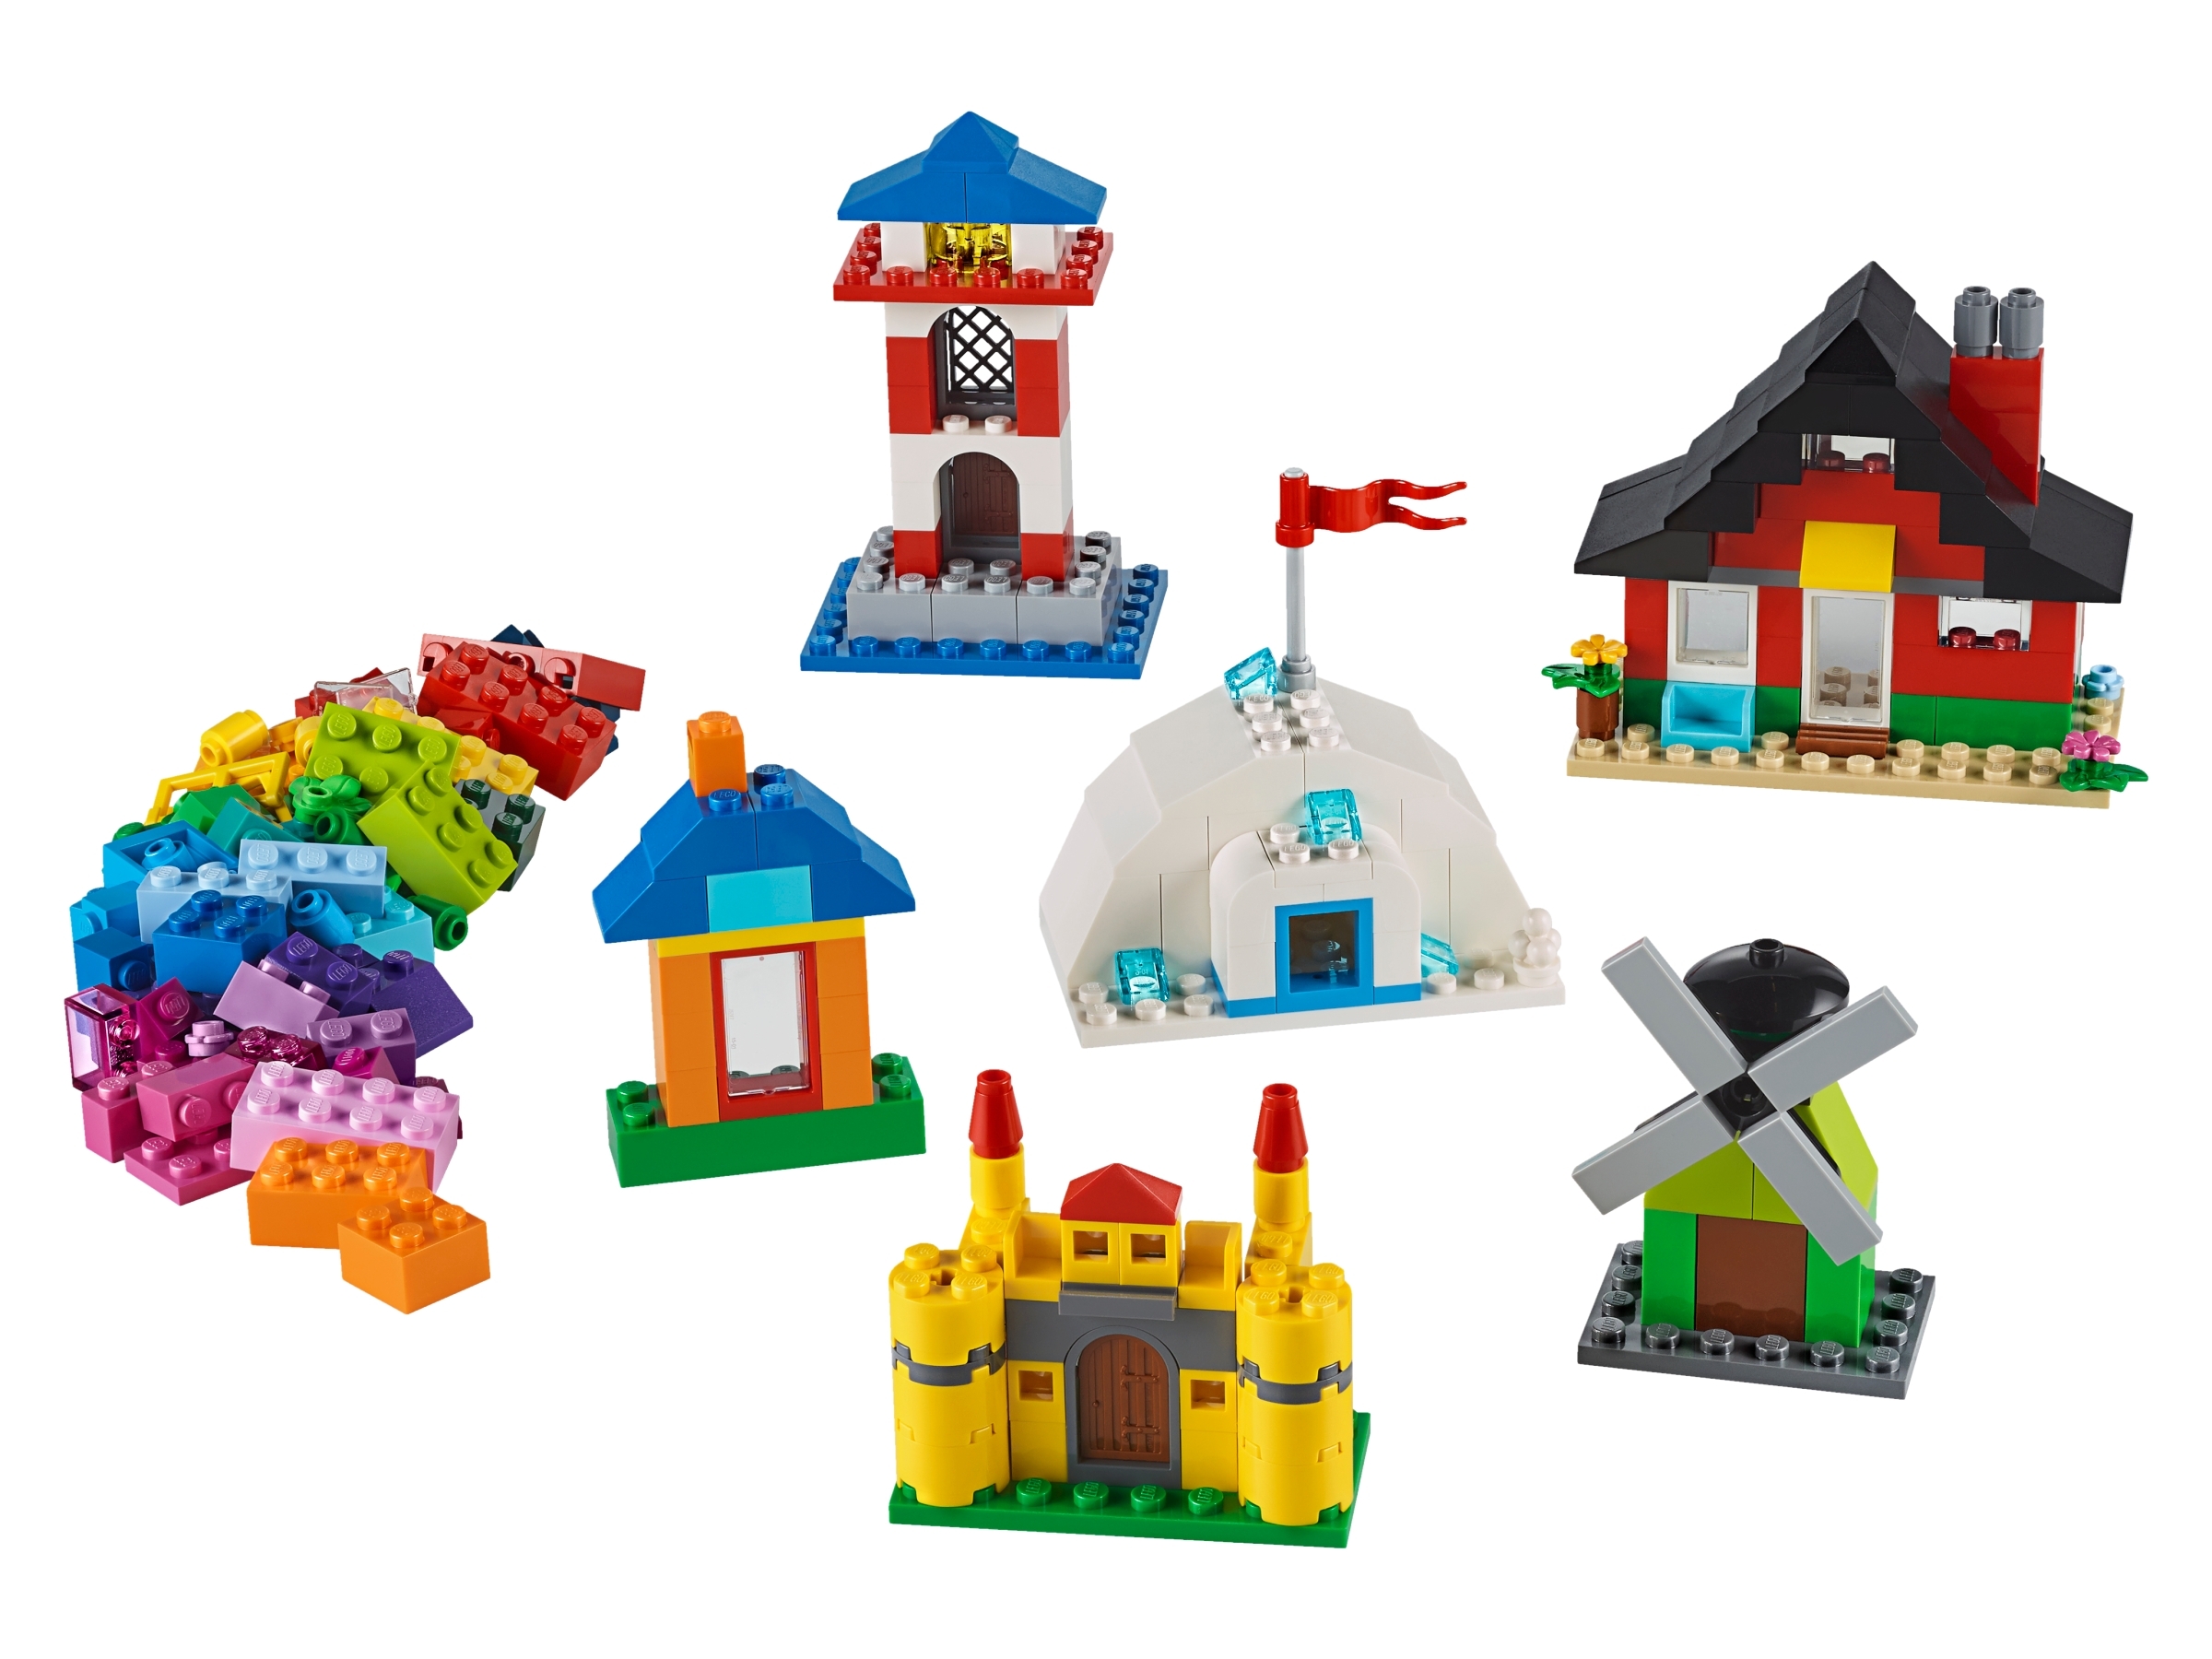 Bricks and Houses 11008 | Classic | online at the Official LEGO® Shop US